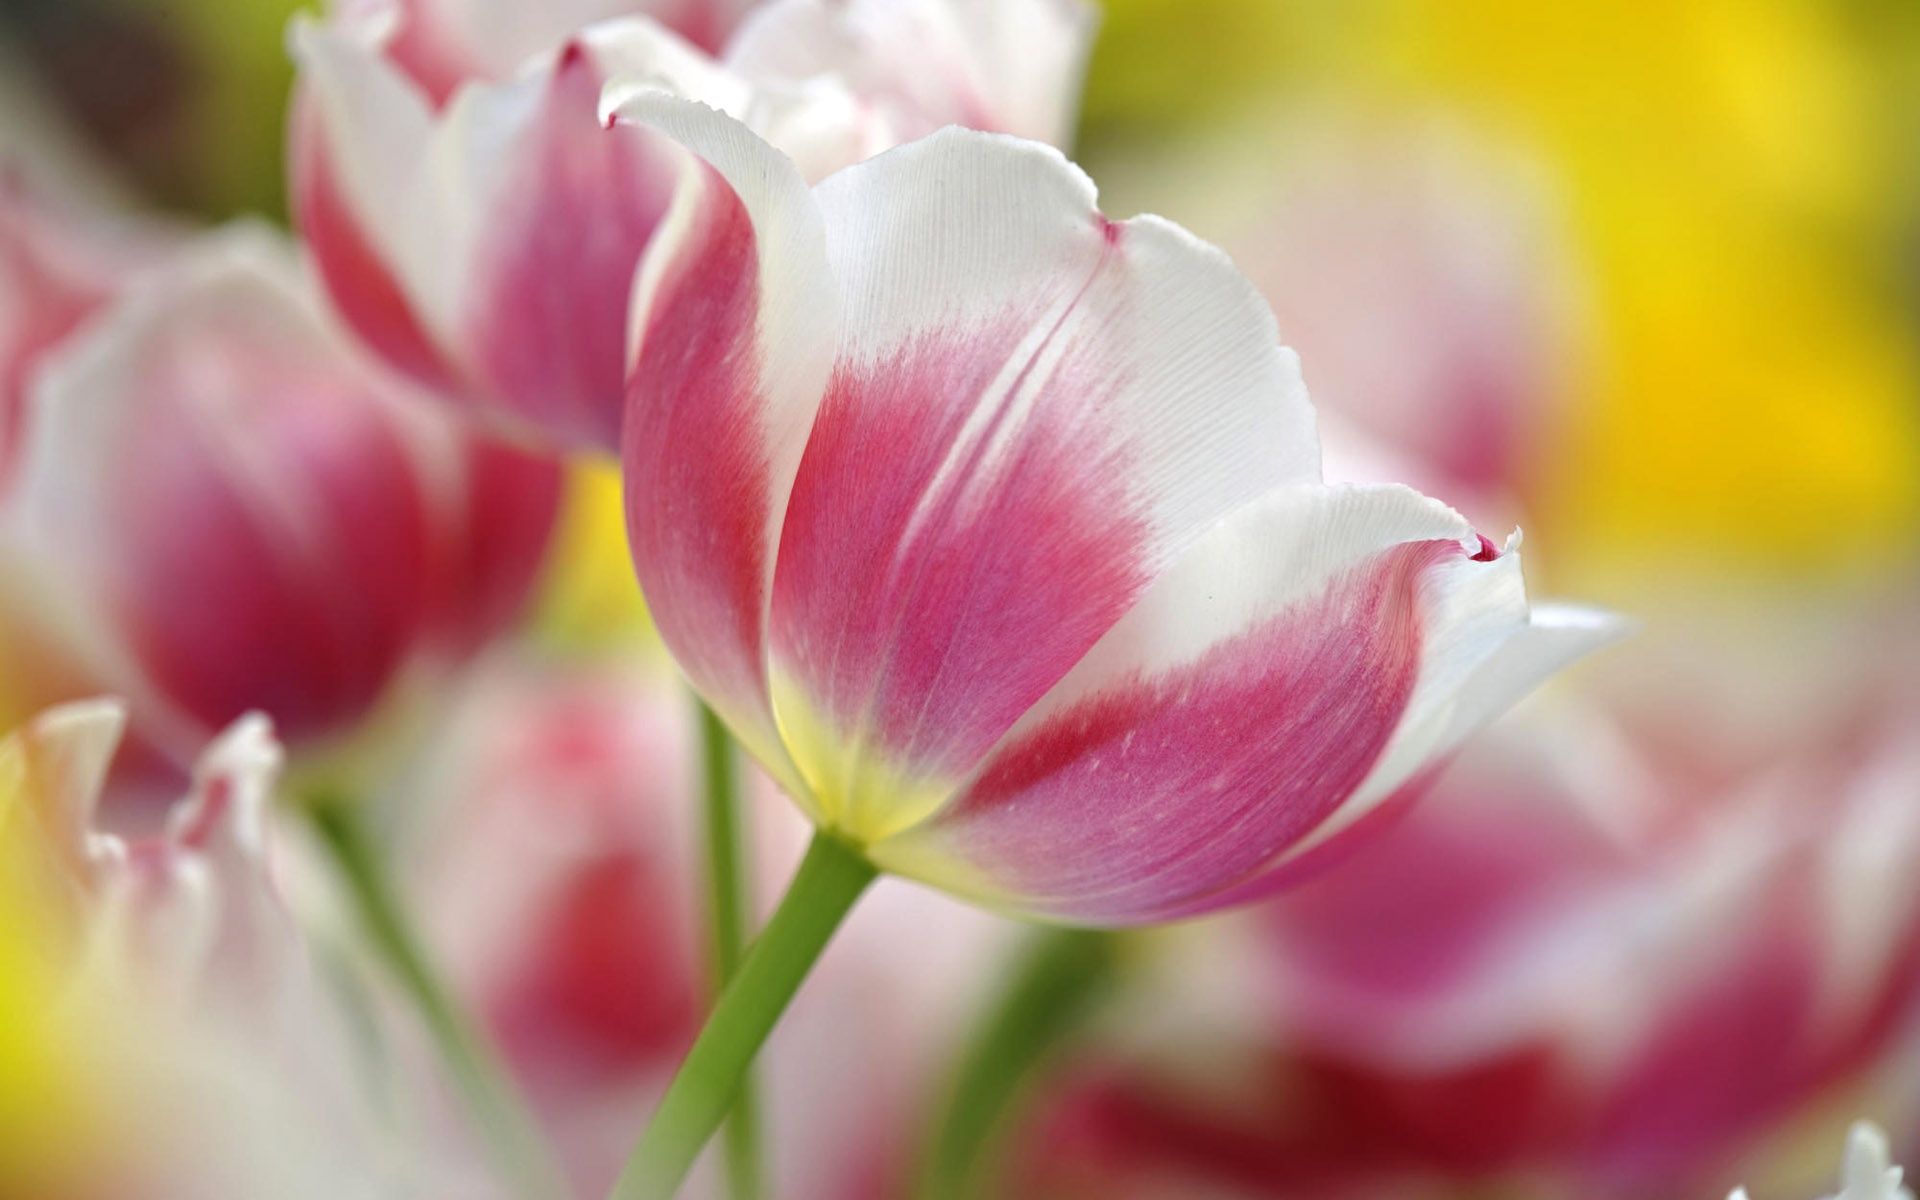 Tulip Wallpapers, Tulip Backgrounds, Tulip Free HD Wallpapers